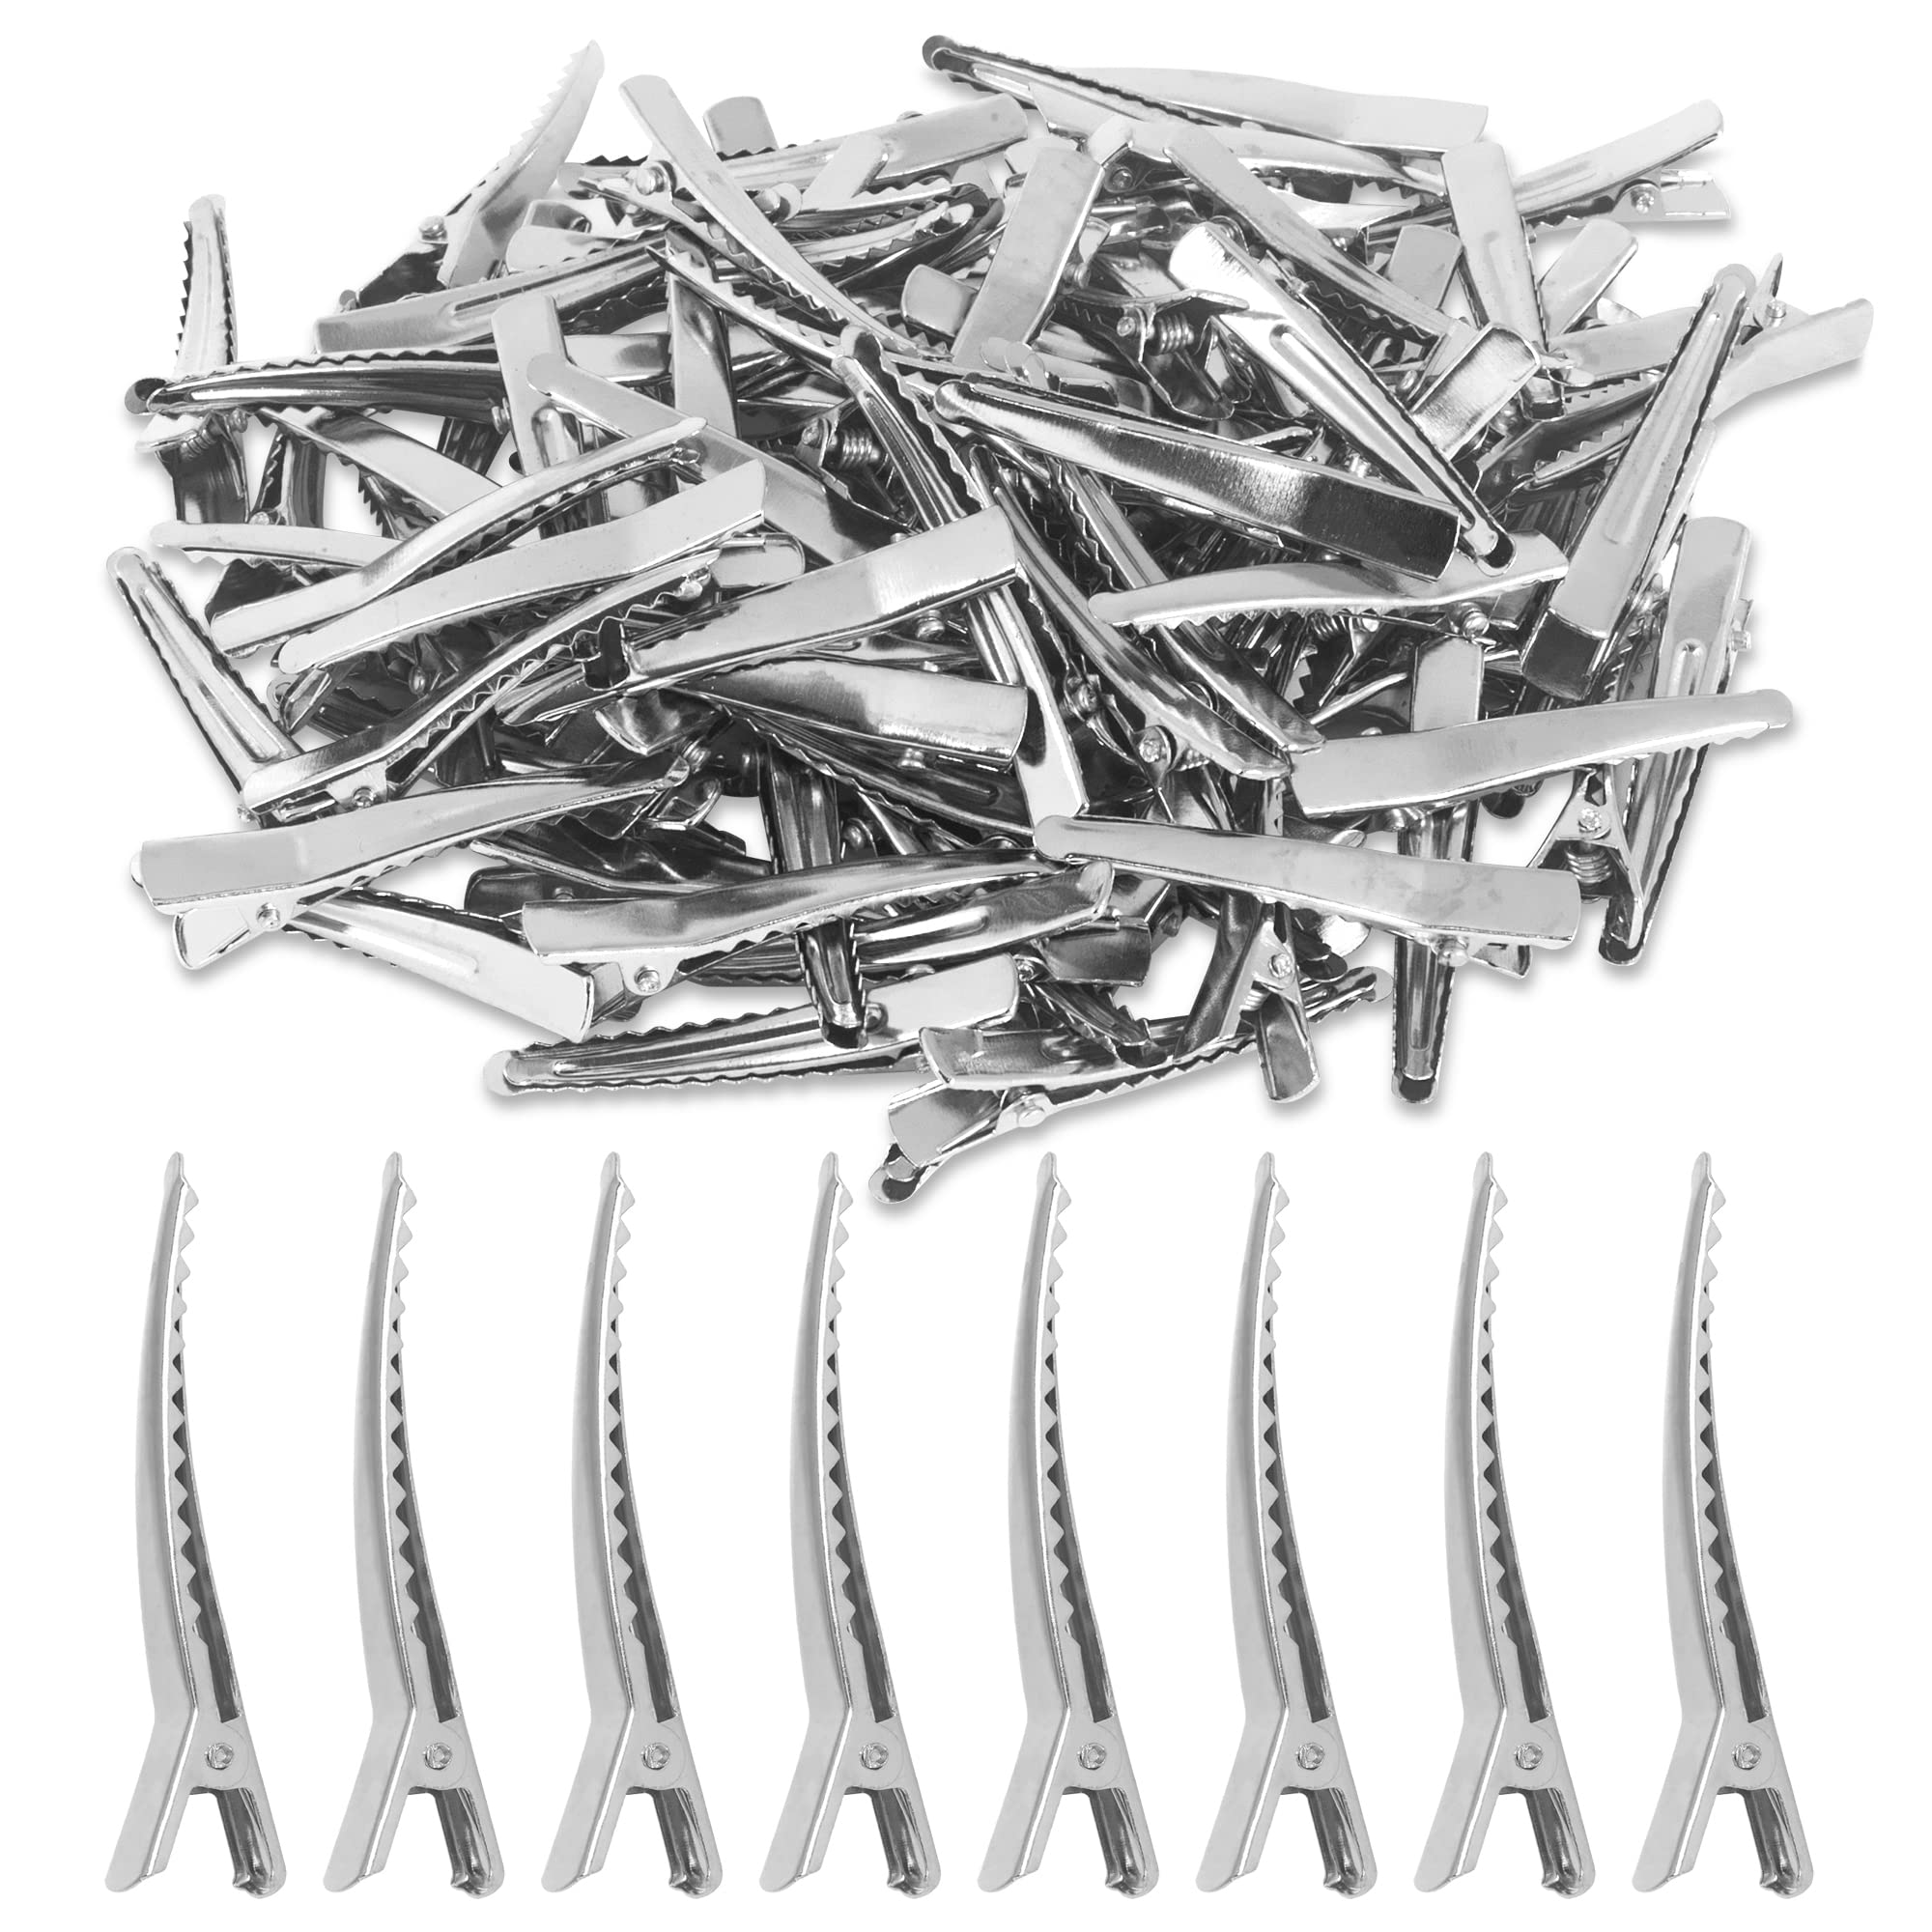 4.5cm Silver Alligator Teeth Prongs Clips Holders for Hair Care